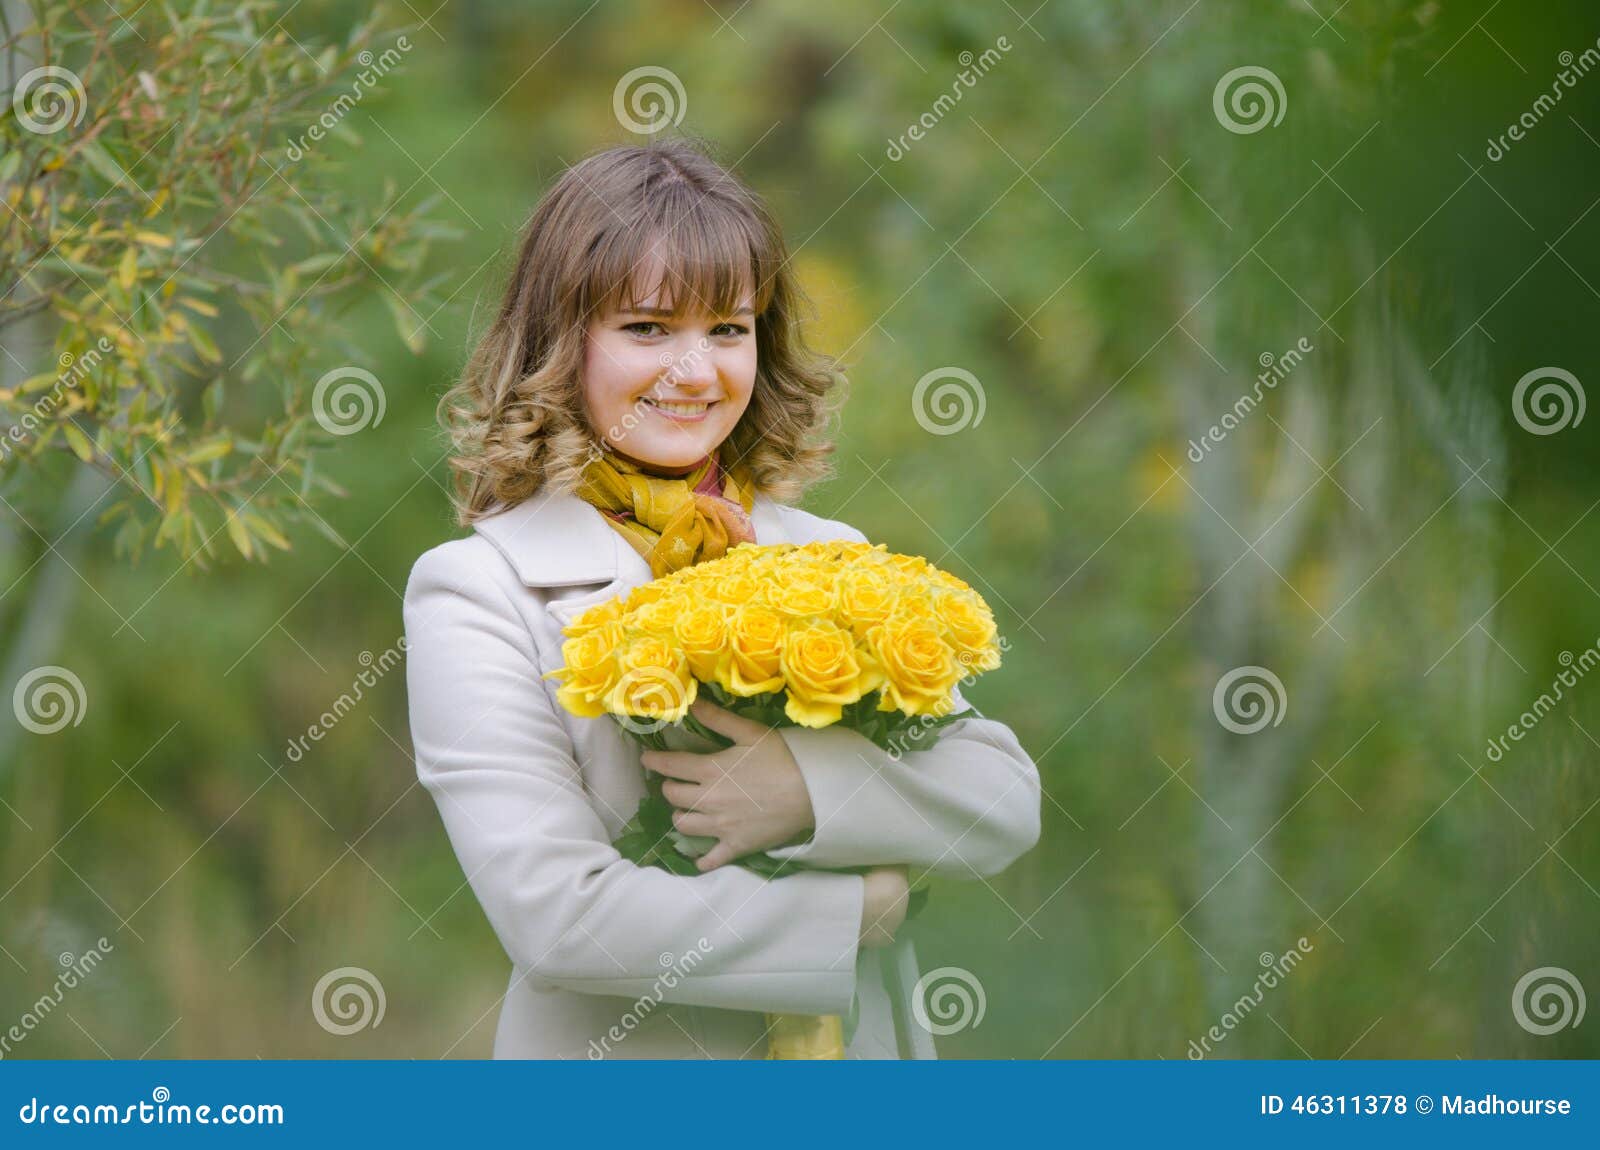 Beautiful Girl with a Bouquet of Yellow Roses Stock Photo - Image of ...